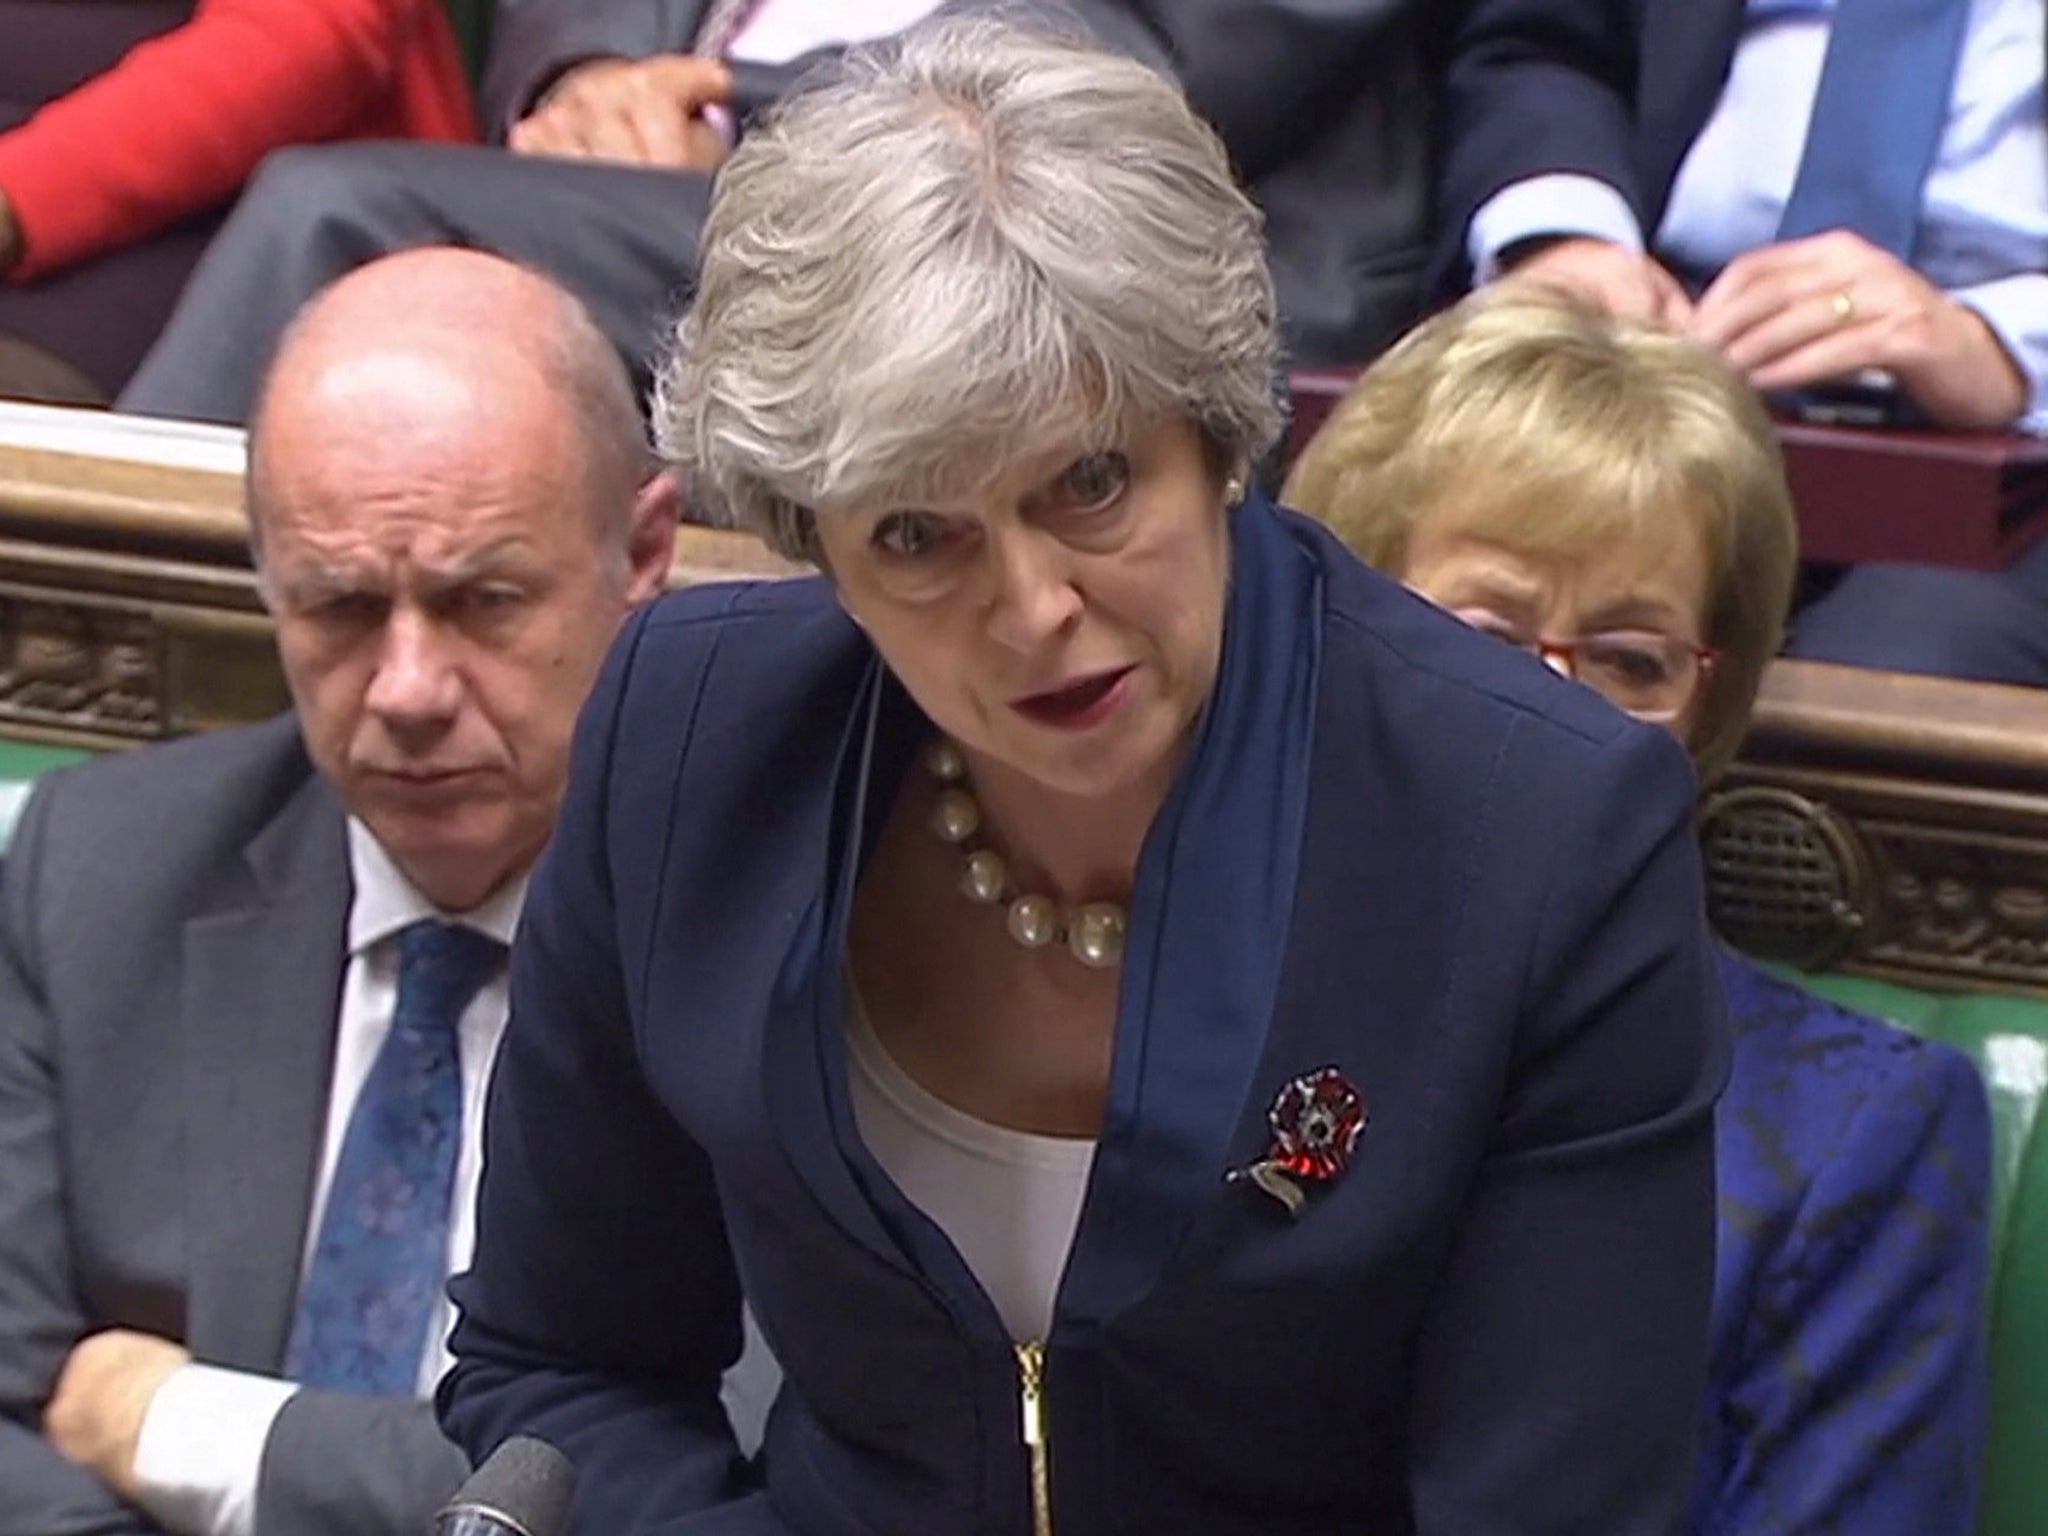 There was an awkward tension in the air at PMQs